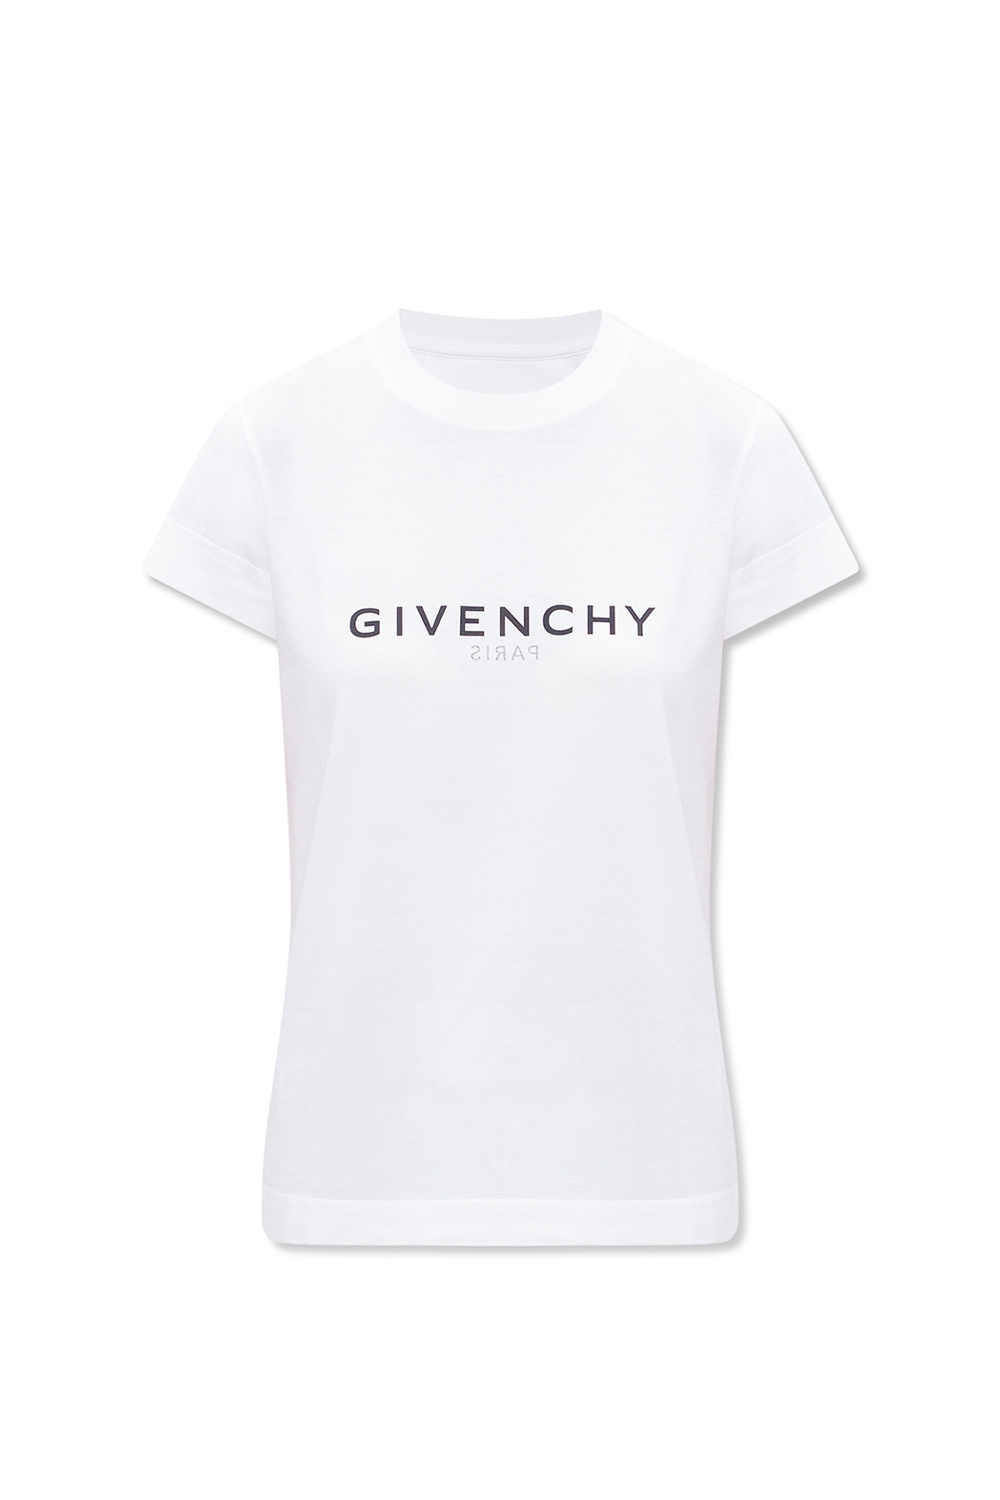 Givenchy Givenchy floral lace panel jumper